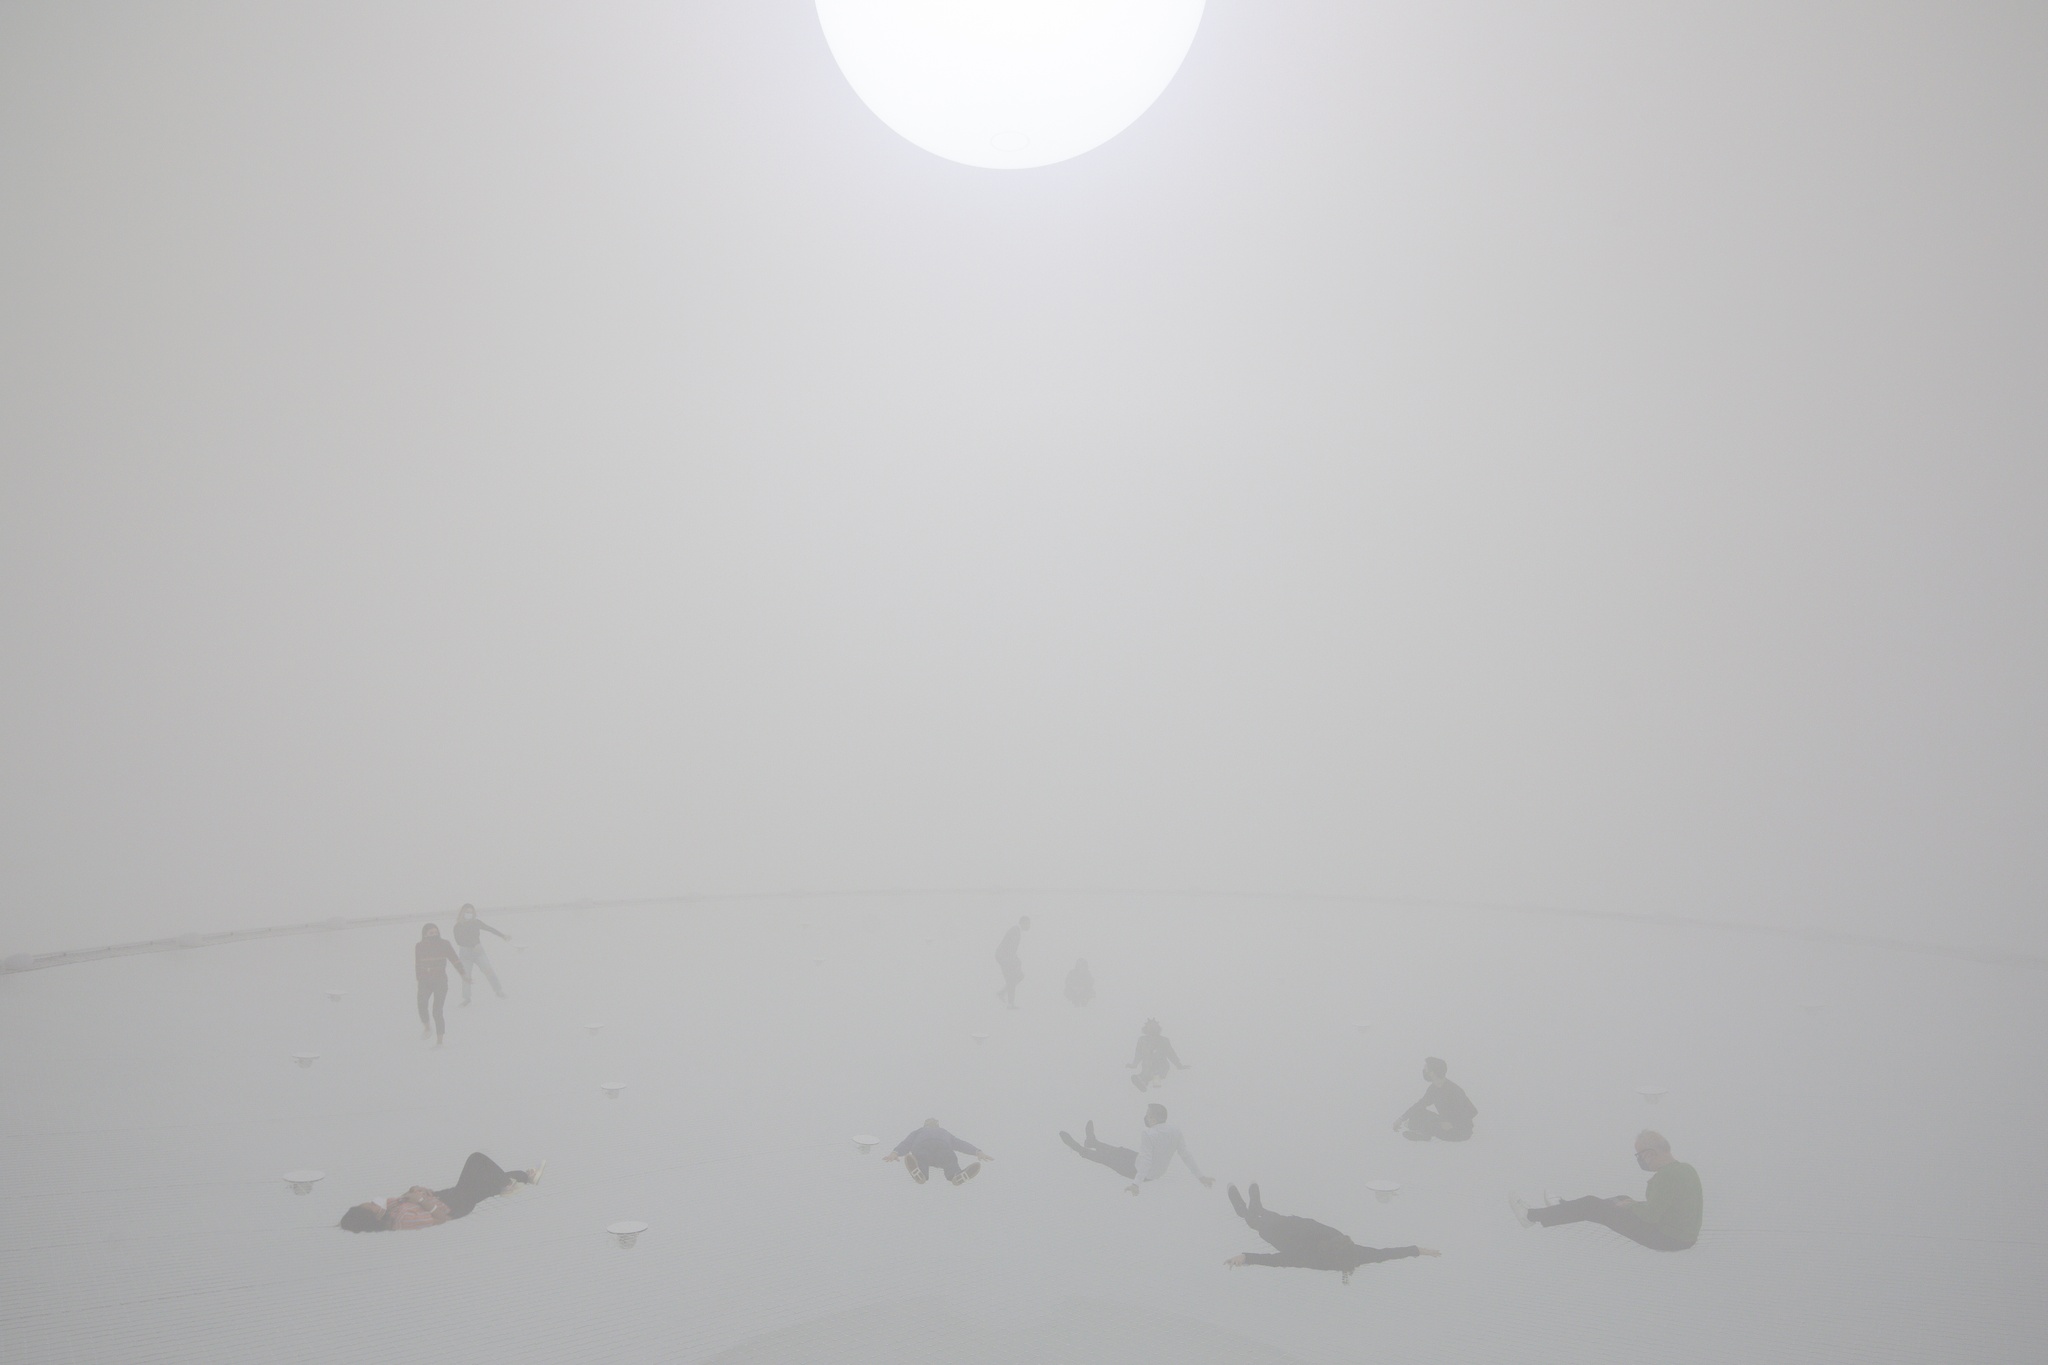 People sitting suspended on a net in a large spherical space that is illuminated by a large spherical white light above and filled with a foggy haze.